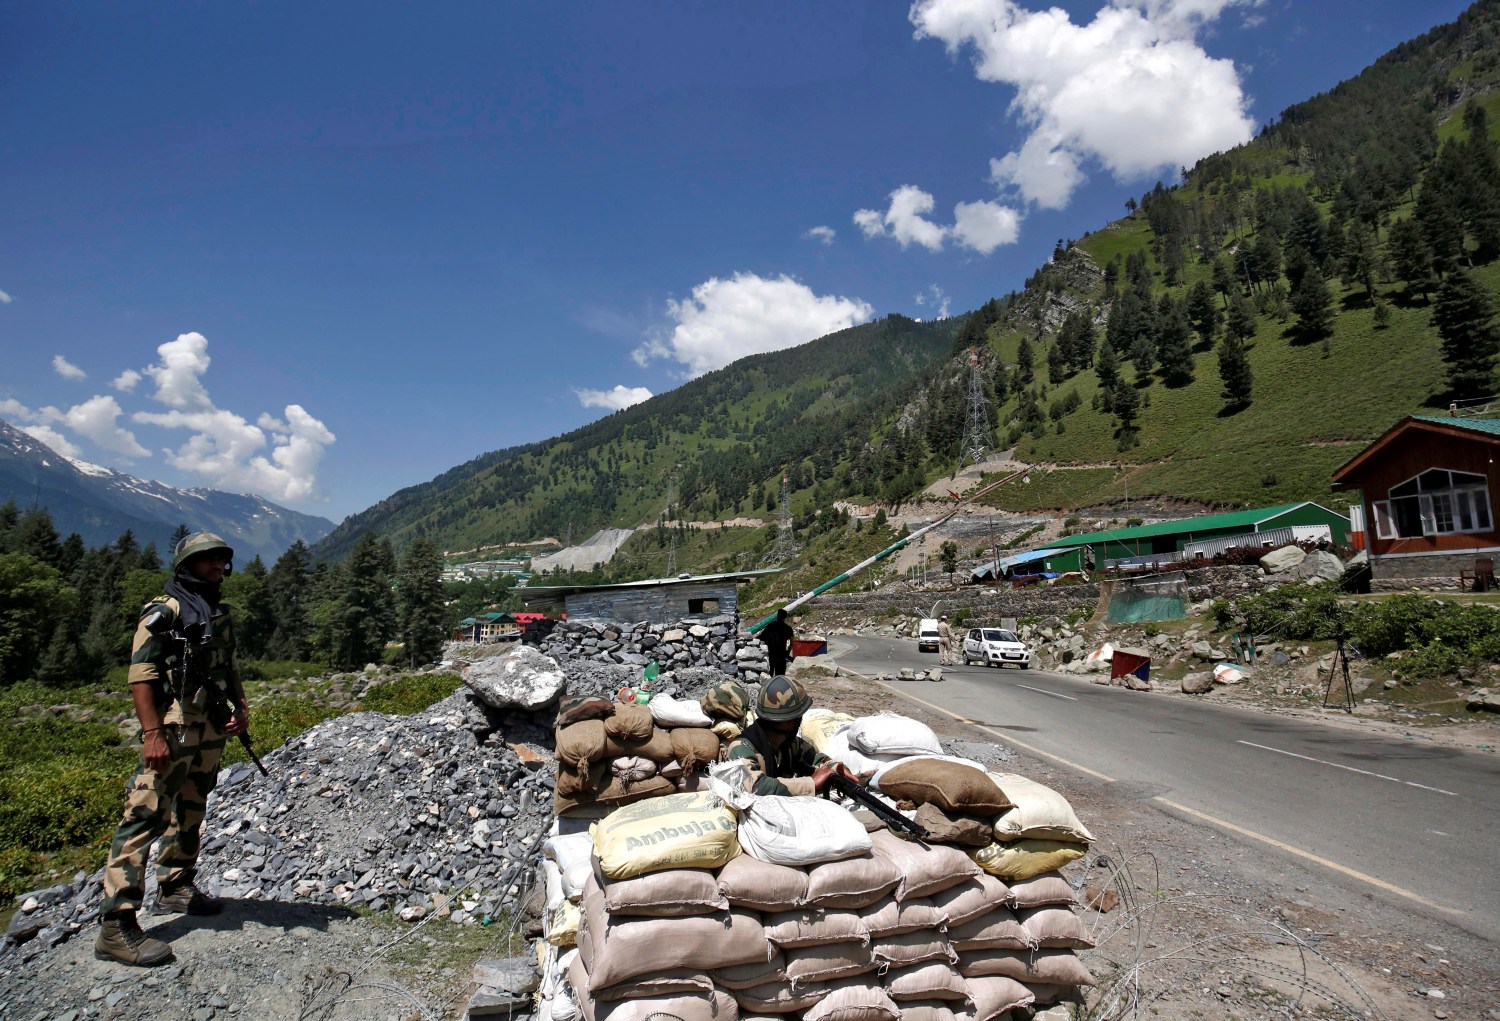 India's Border Security Force (BSF) soldiers stand guard at a checkpoint along a highway leading to Ladakh, at Gagangeer in Kashmir's Ganderbal district June 17, 2020. REUTERS/Danish Ismail